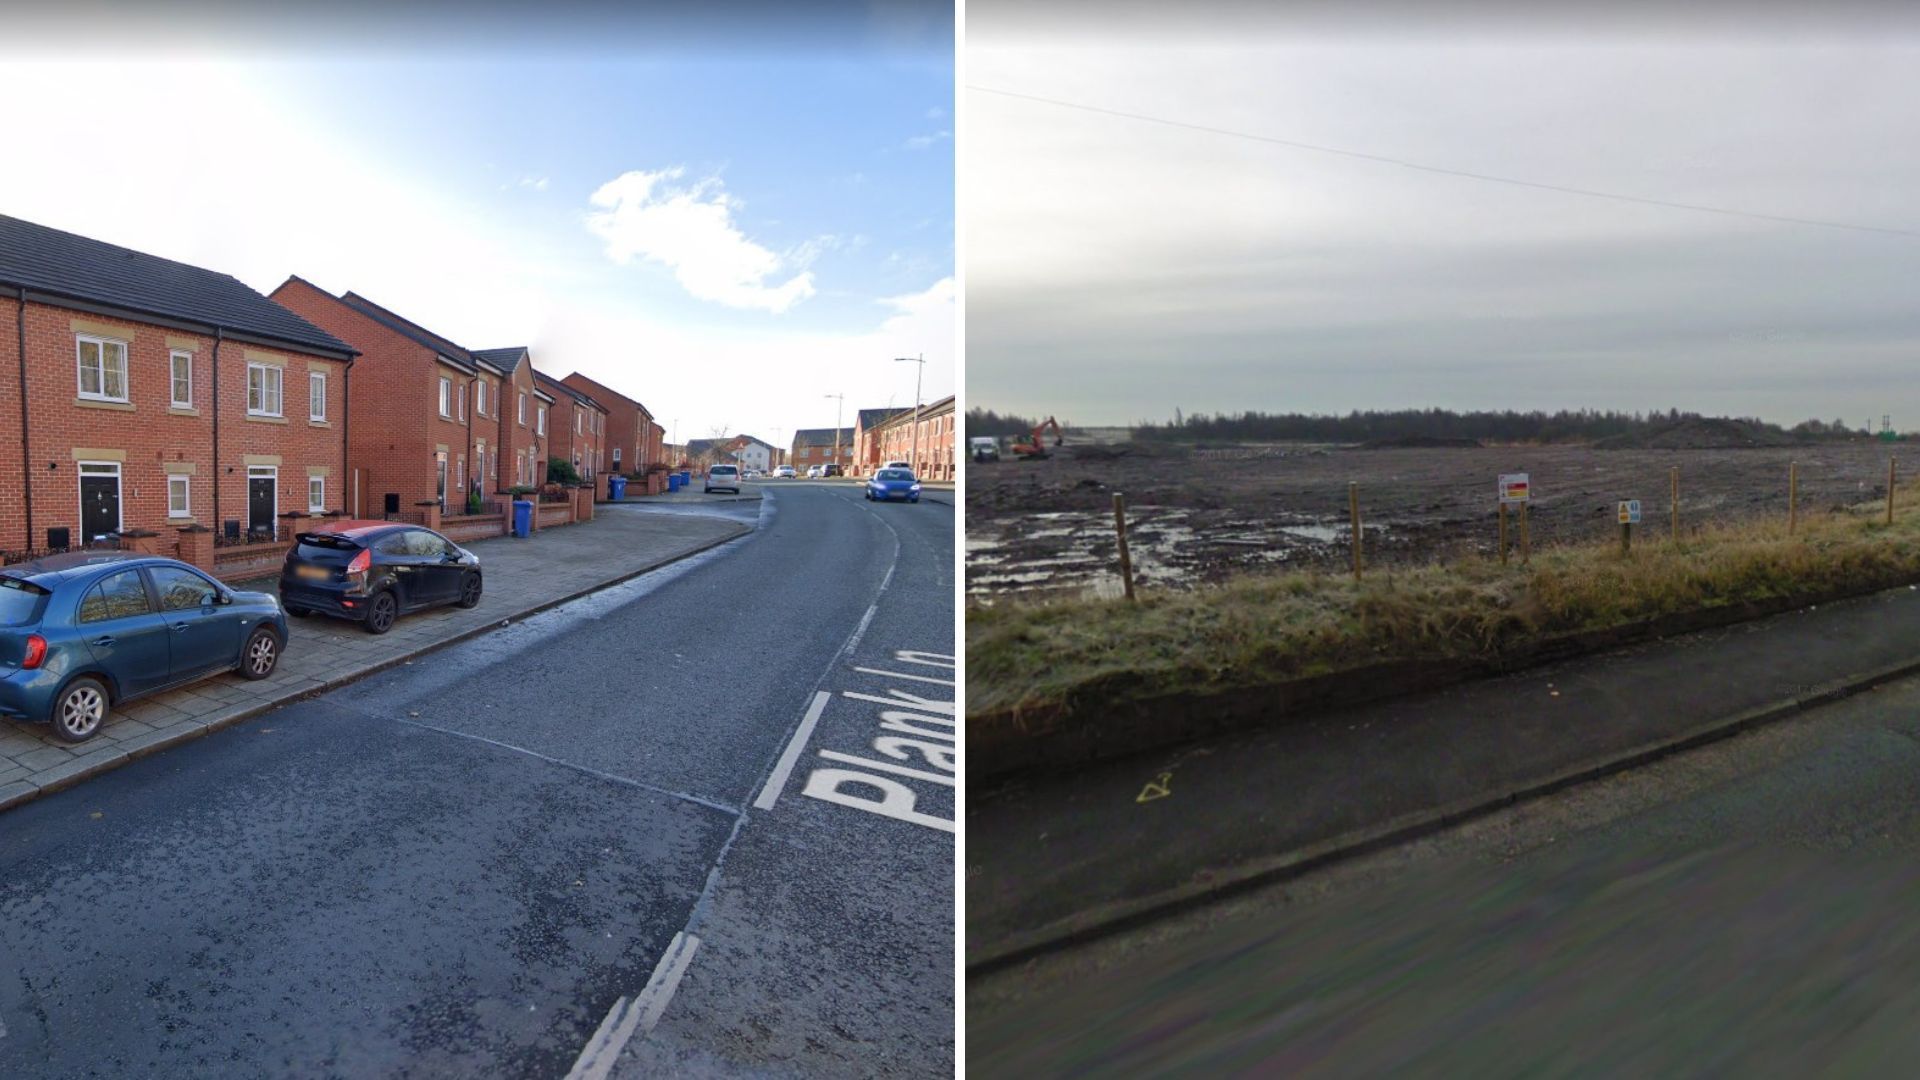 Plank Lane development of Pennington Wharf in Leigh compared between 2009 and 2020.